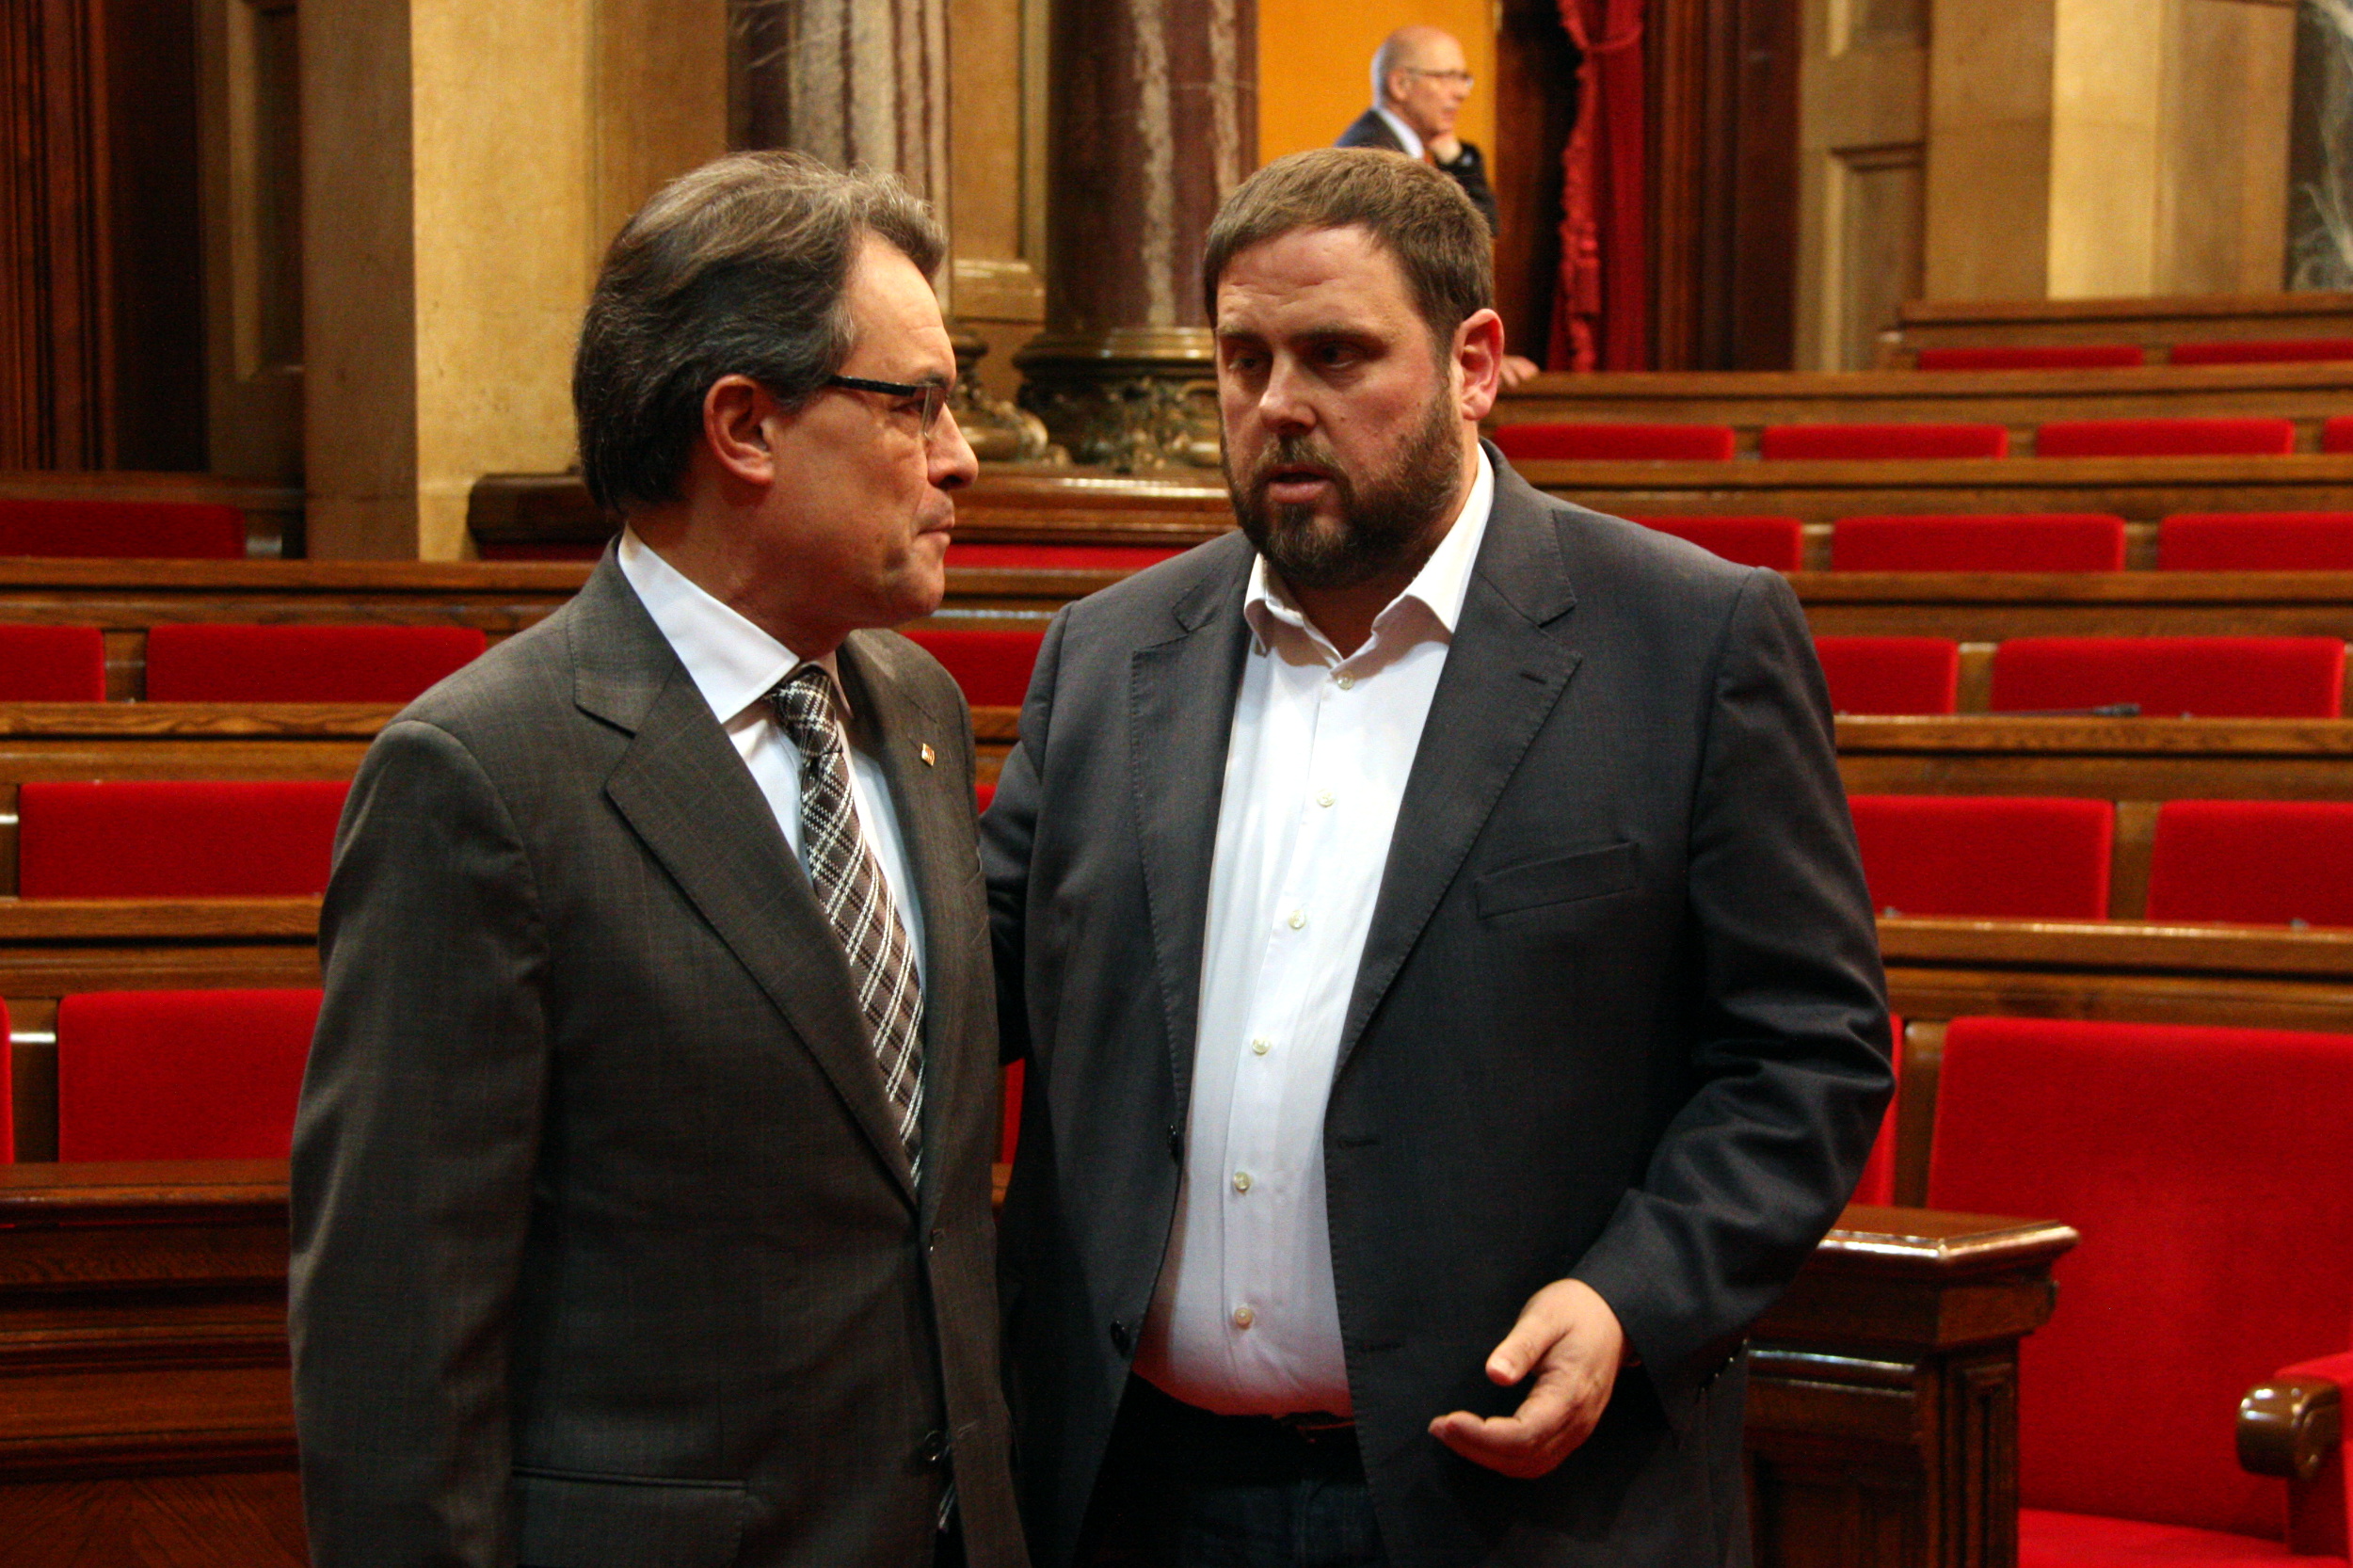 The Catalan President and leader of CiU, Artur Mas, and the leader of ERC, Oriol Junqueras (by ACN)